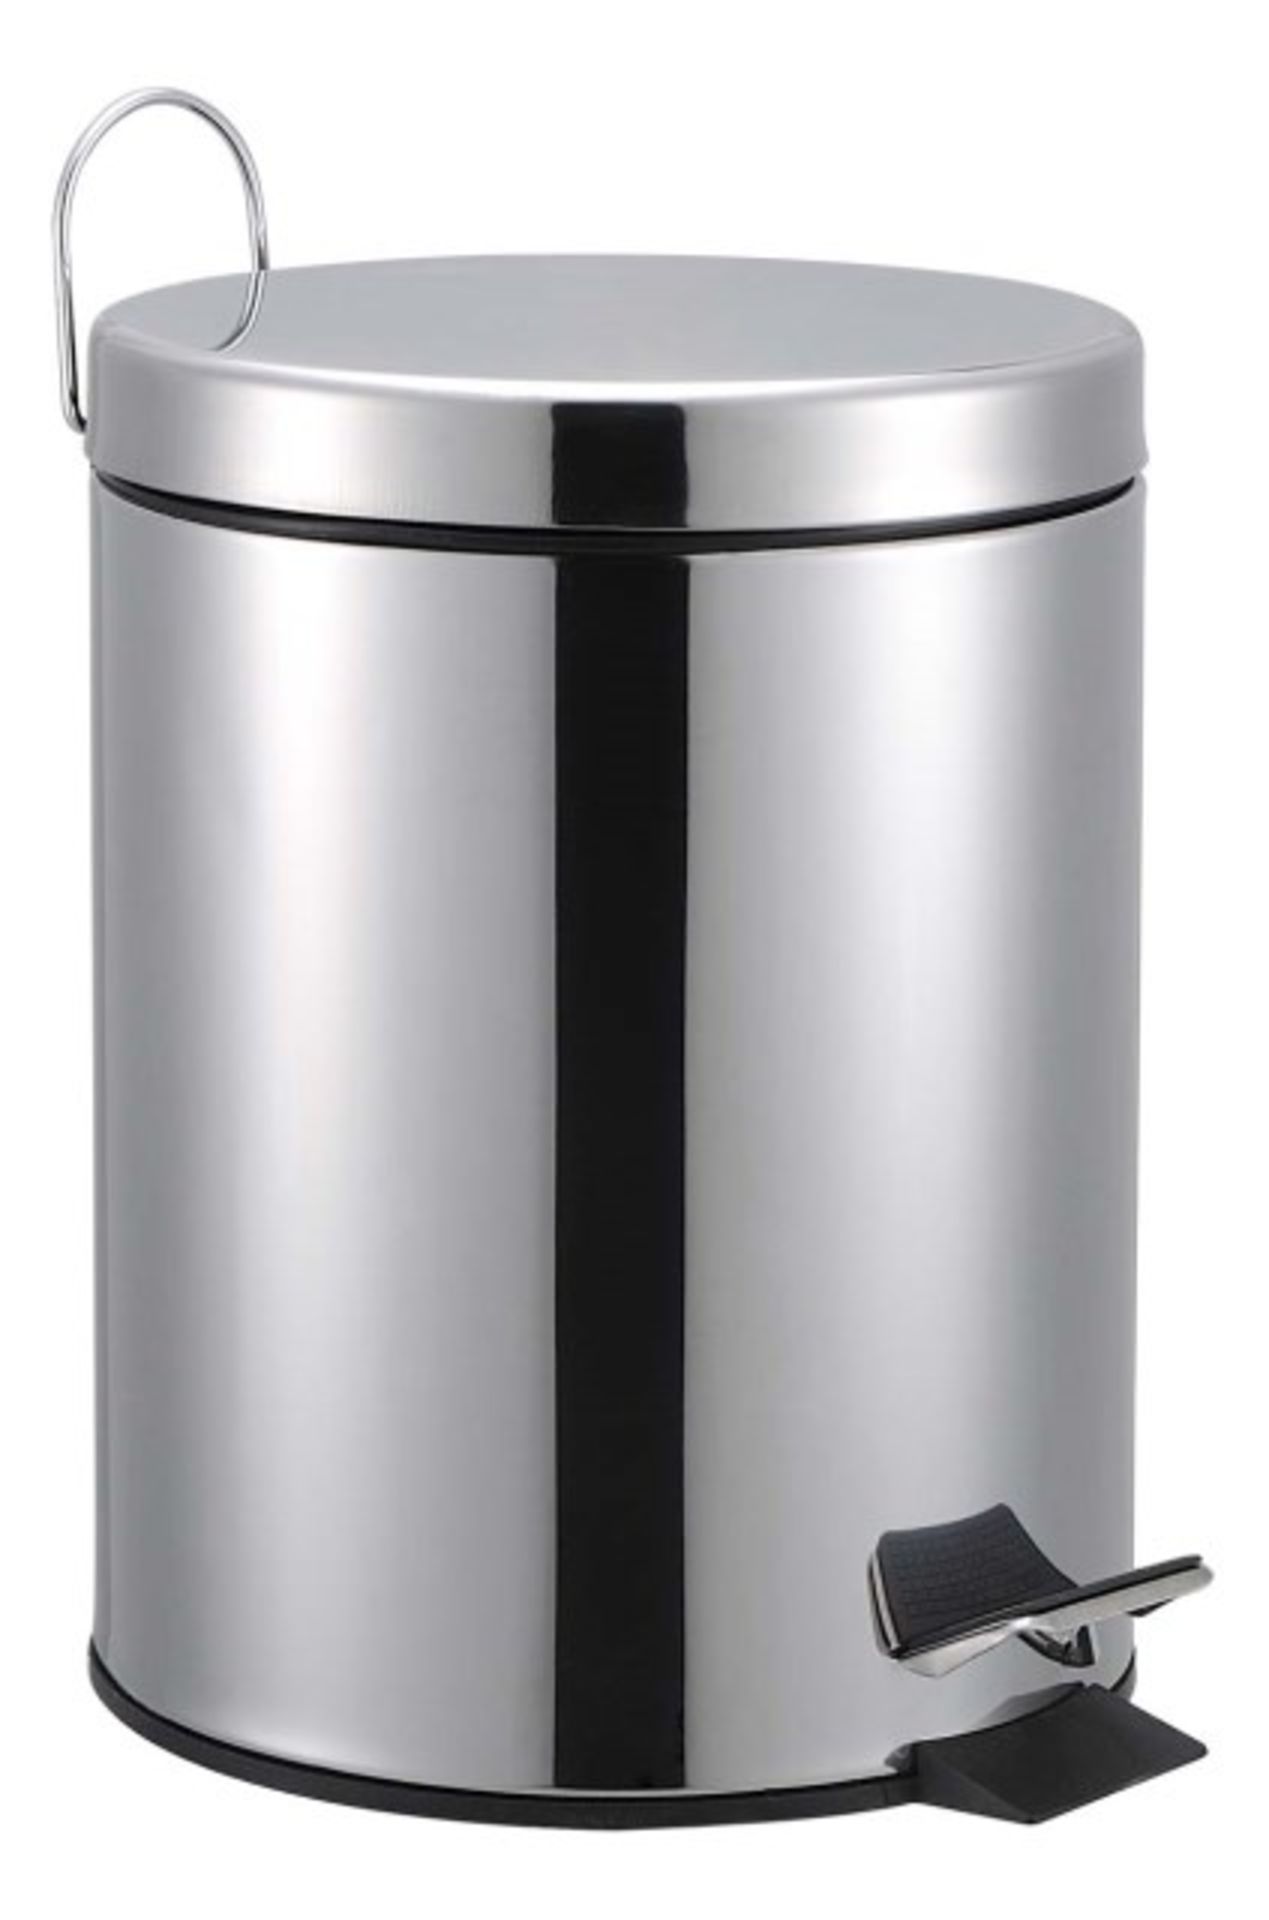 V Brand New Stainless Steel Five Litre Pedal Bin X 2 Bid price to be multiplied by Two